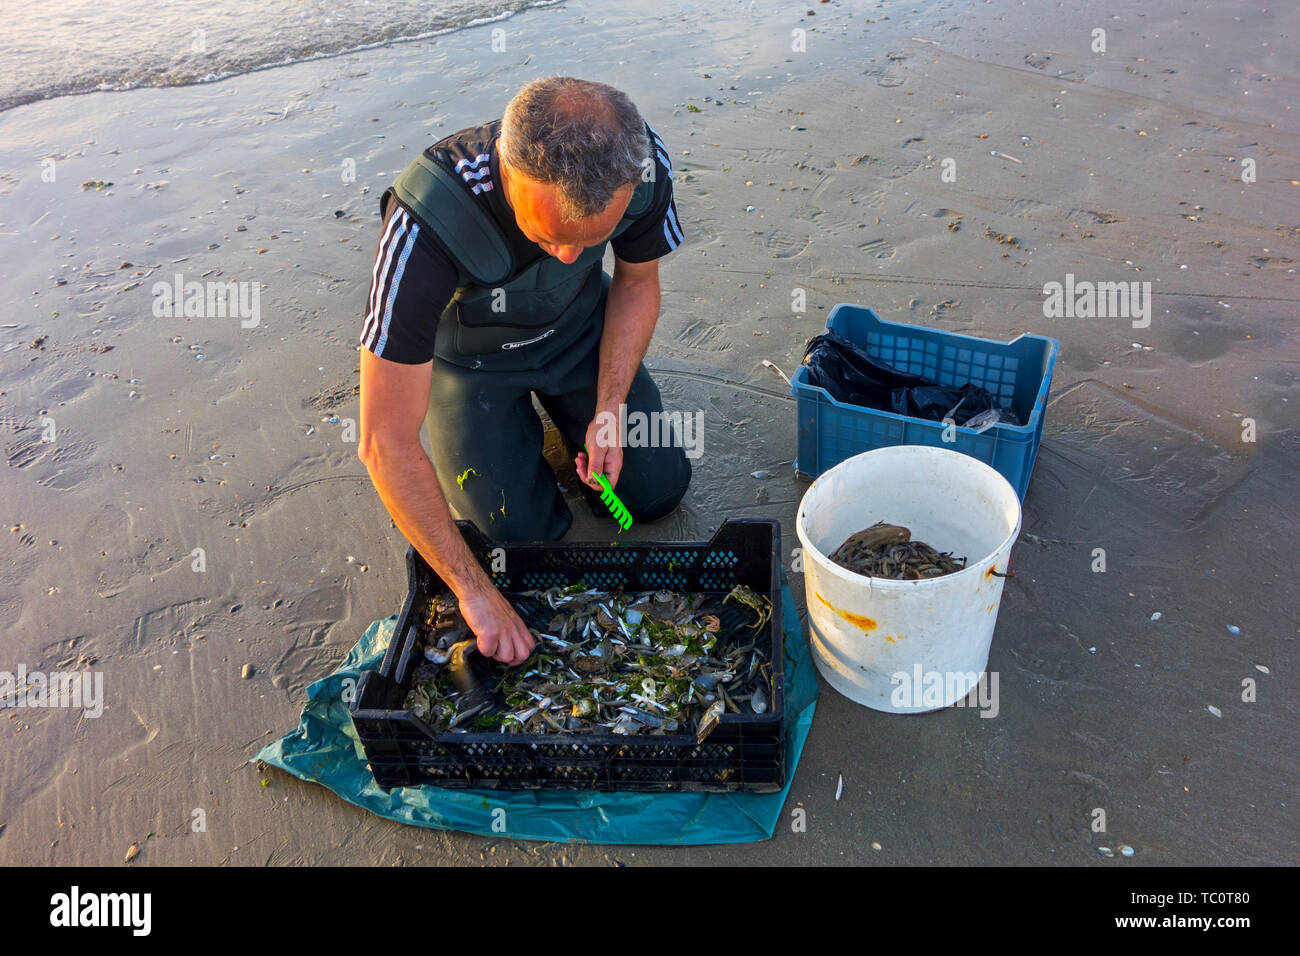 Shrimper sorting catch from shrimp drag net on the beach caught along the North Sea coast Stock Photo